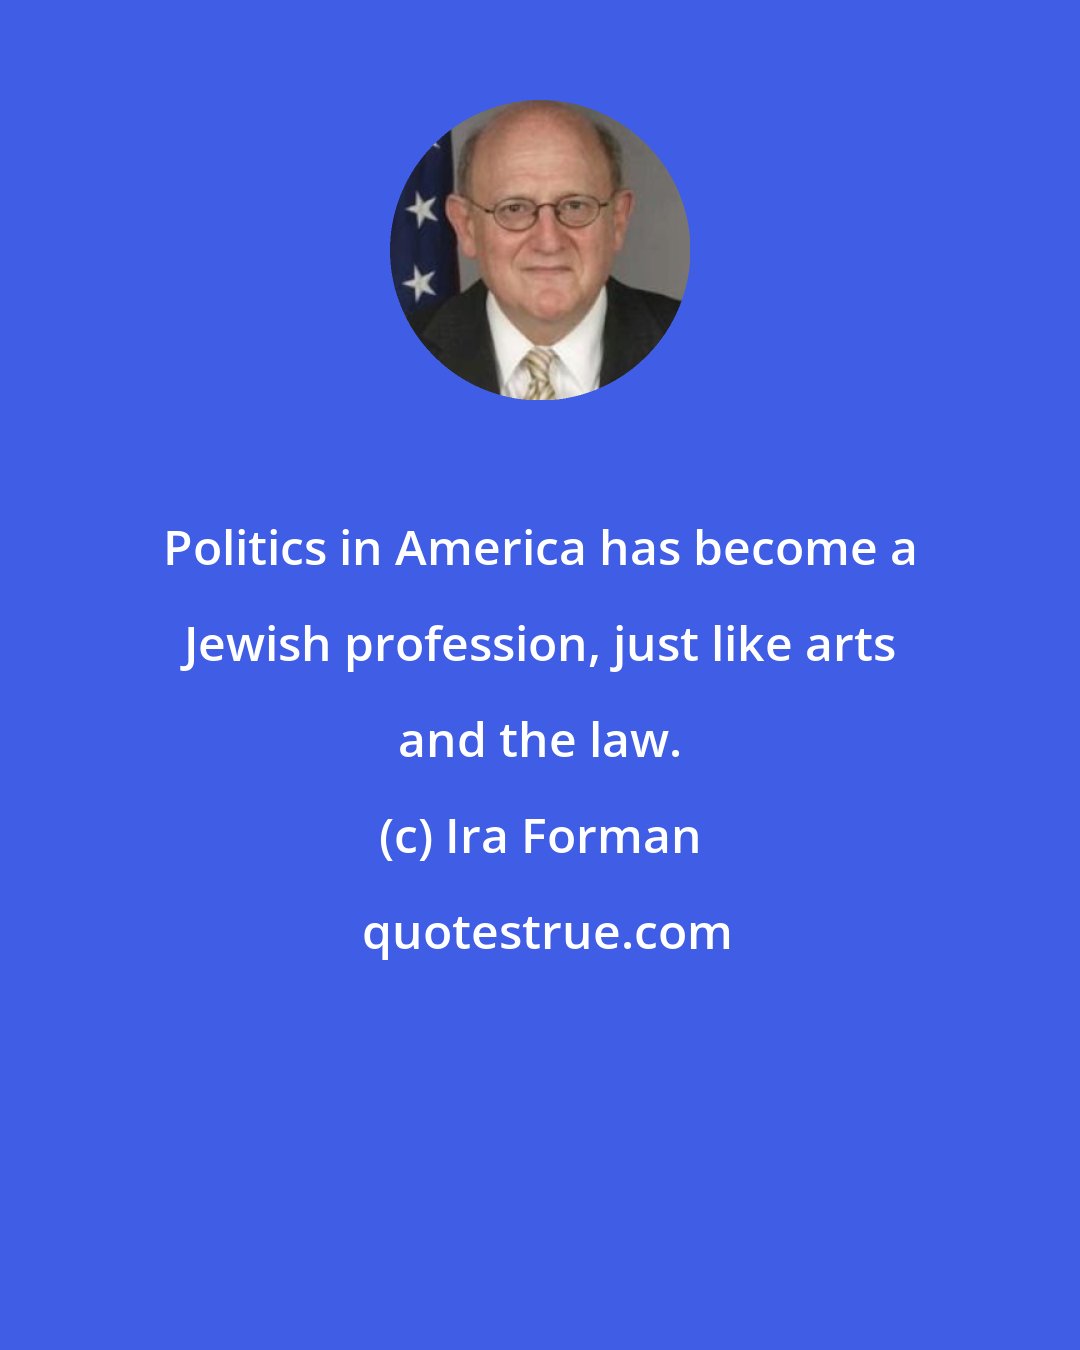 Ira Forman: Politics in America has become a Jewish profession, just like arts and the law.